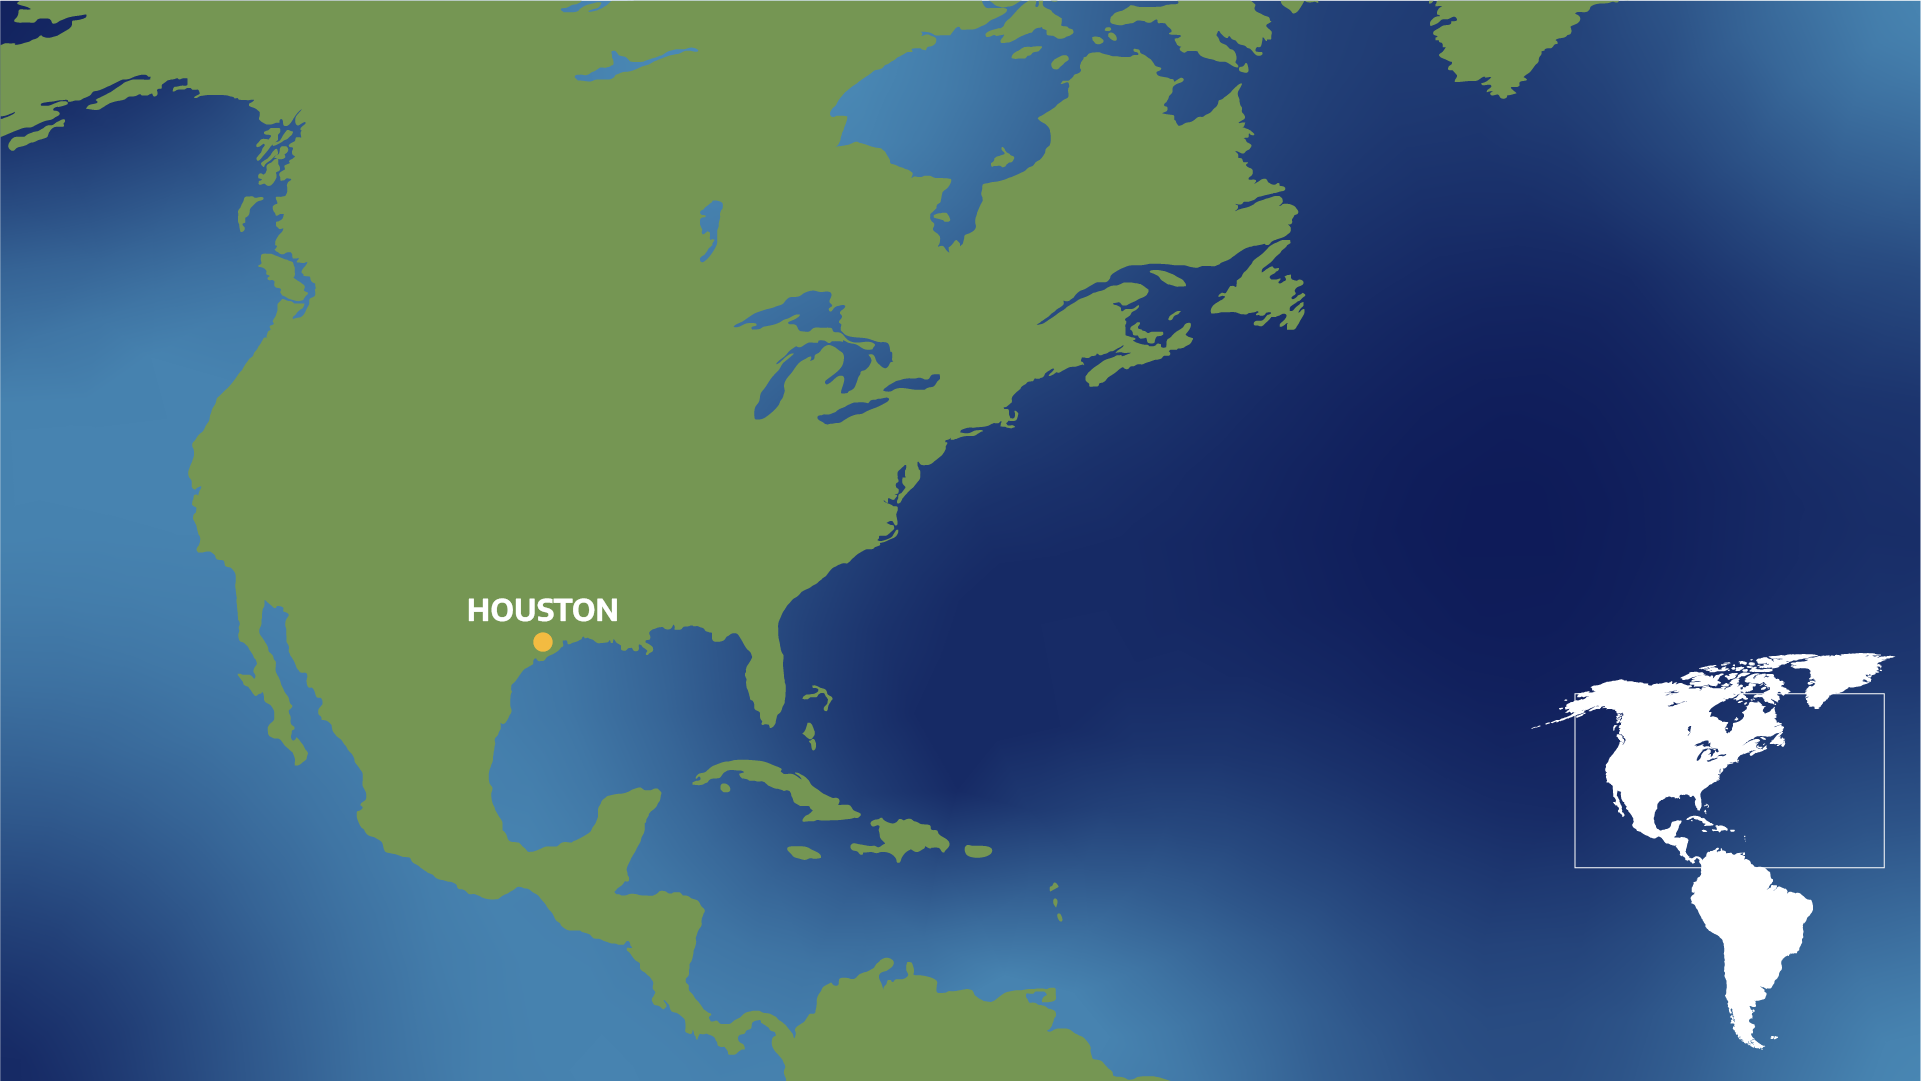 Map of Texas as we know it today with the coastline extending far out into the Gulf of Mexico.